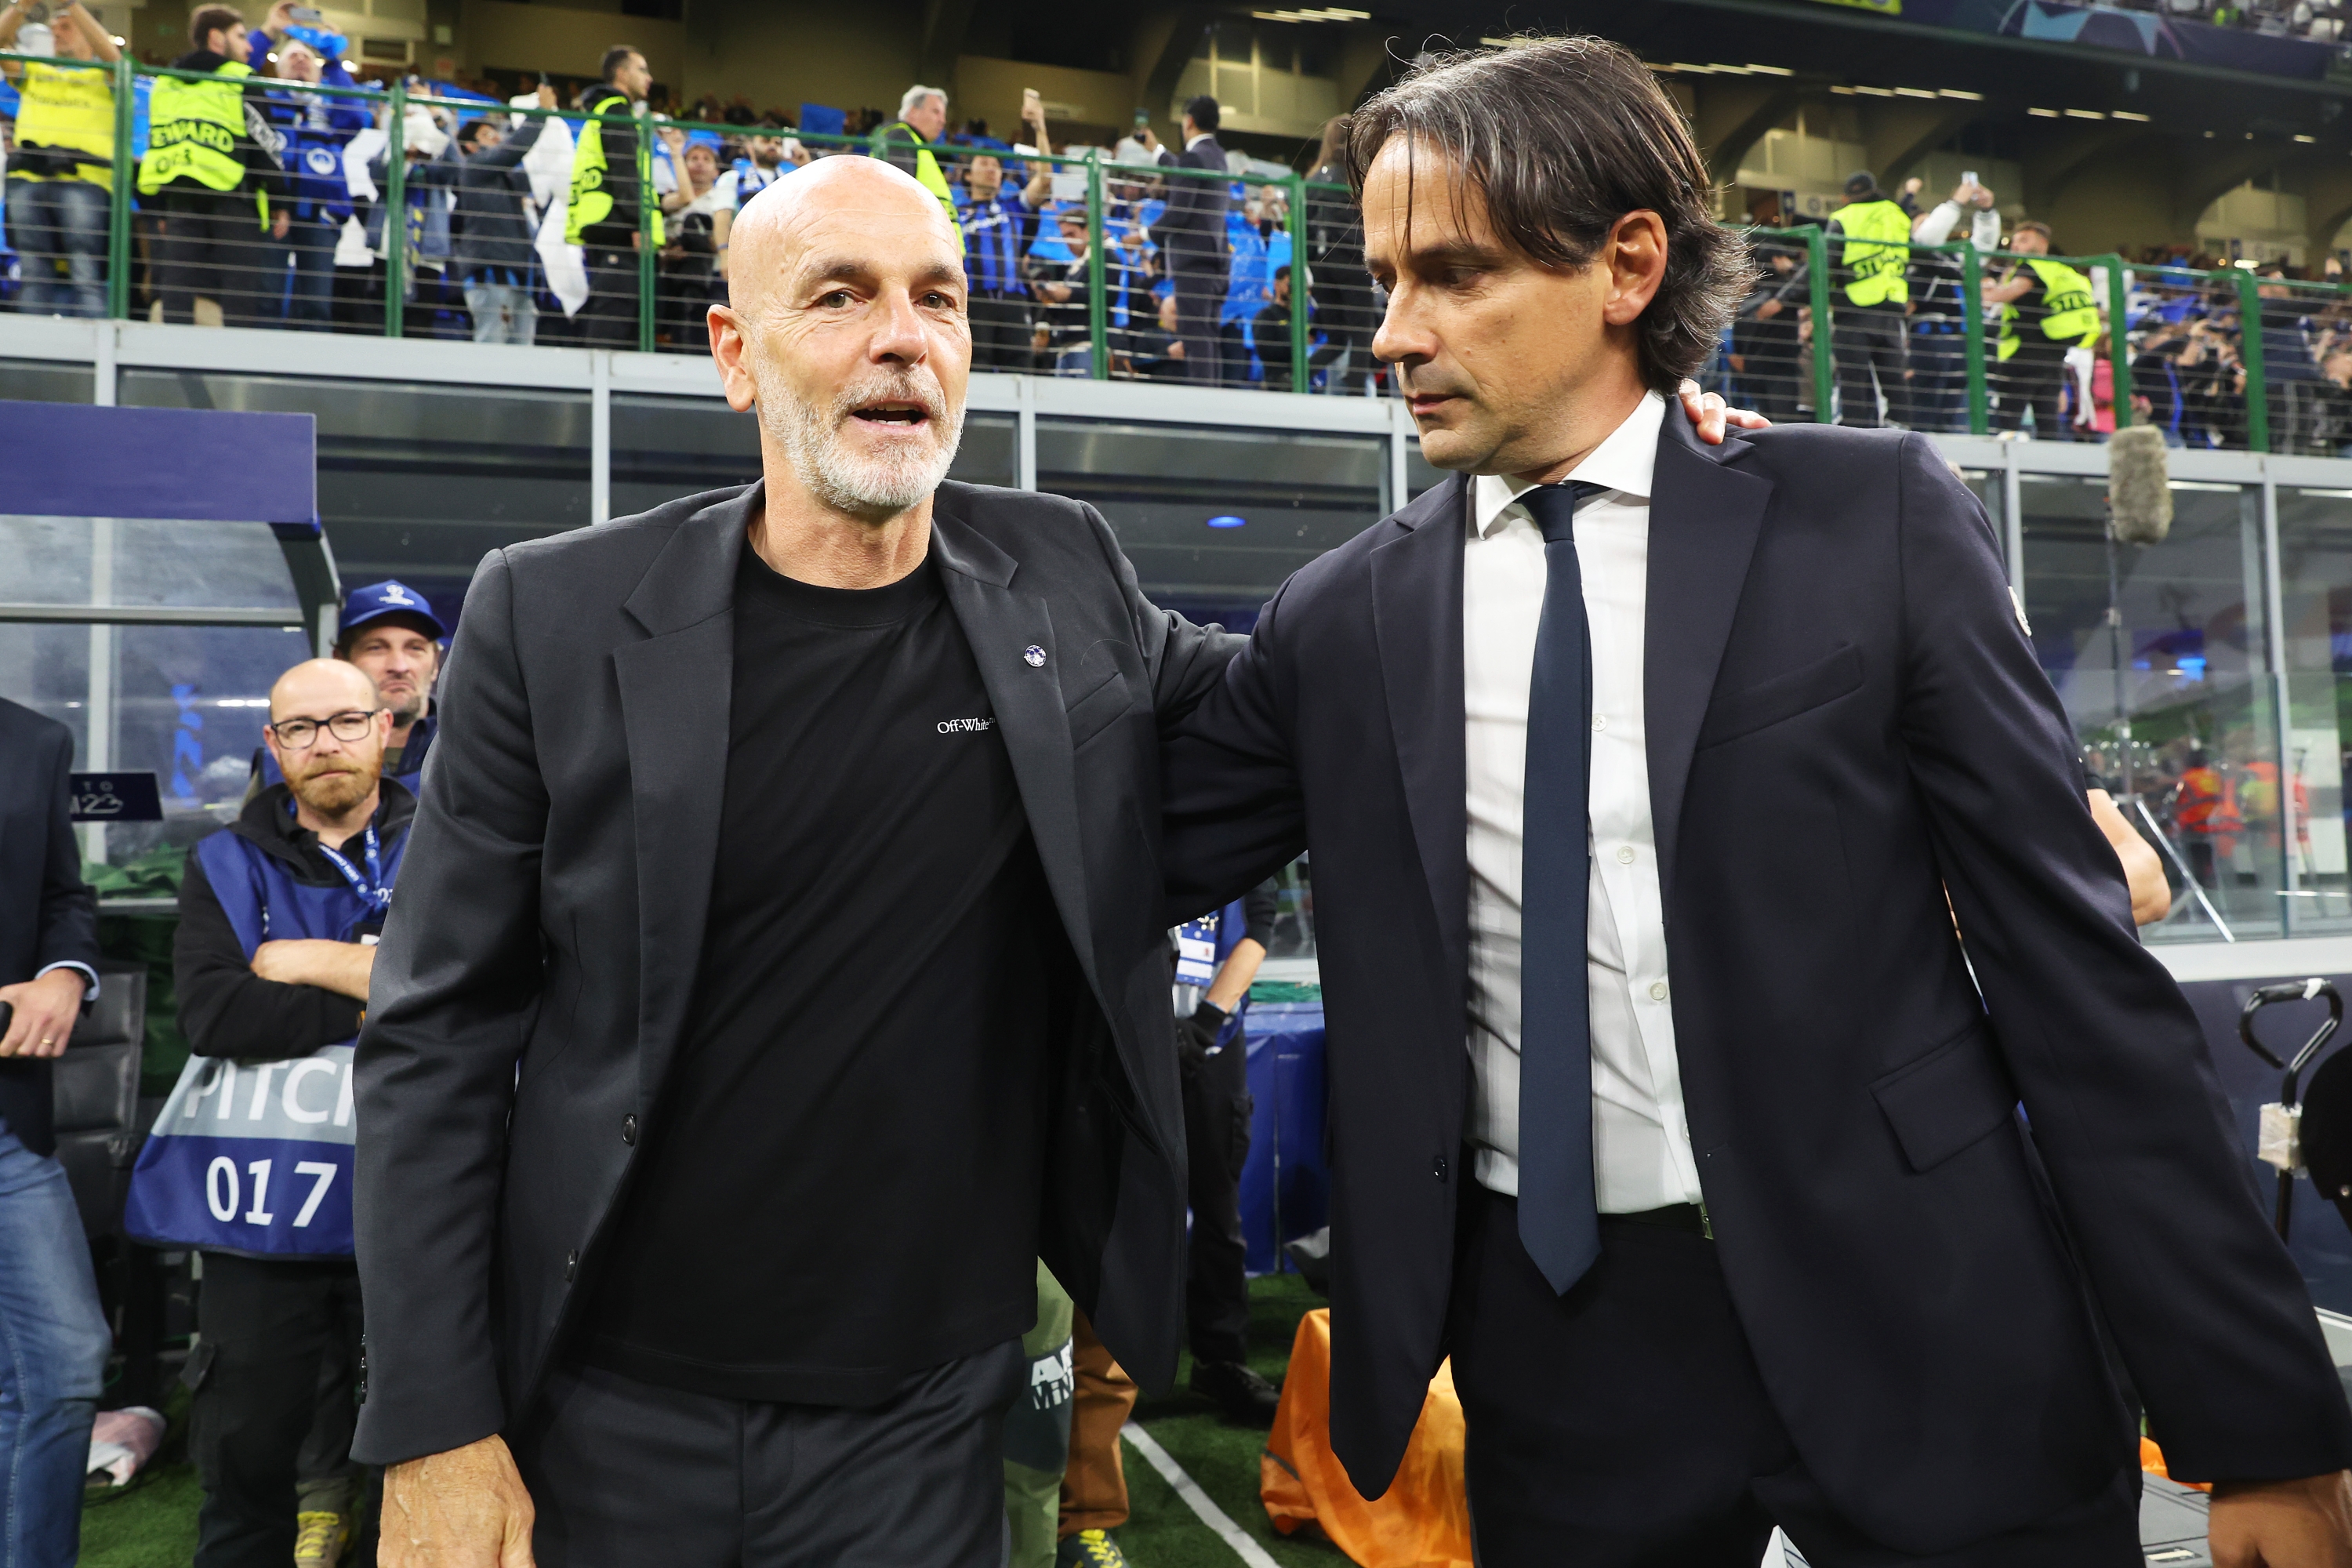 MILAN, ITALY - MAY 16: Stefano Pioli, Head Coach of AC Milan, talks to Simone Inzaghi, Head Coach of FC Internazionale, prior to the UEFA Champions League semi-final second leg match between FC Internazionale and AC Milan at Stadio Giuseppe Meazza on May 16, 2023 in Milan, Italy. (Photo by Alexander Hassenstein/Getty Images)